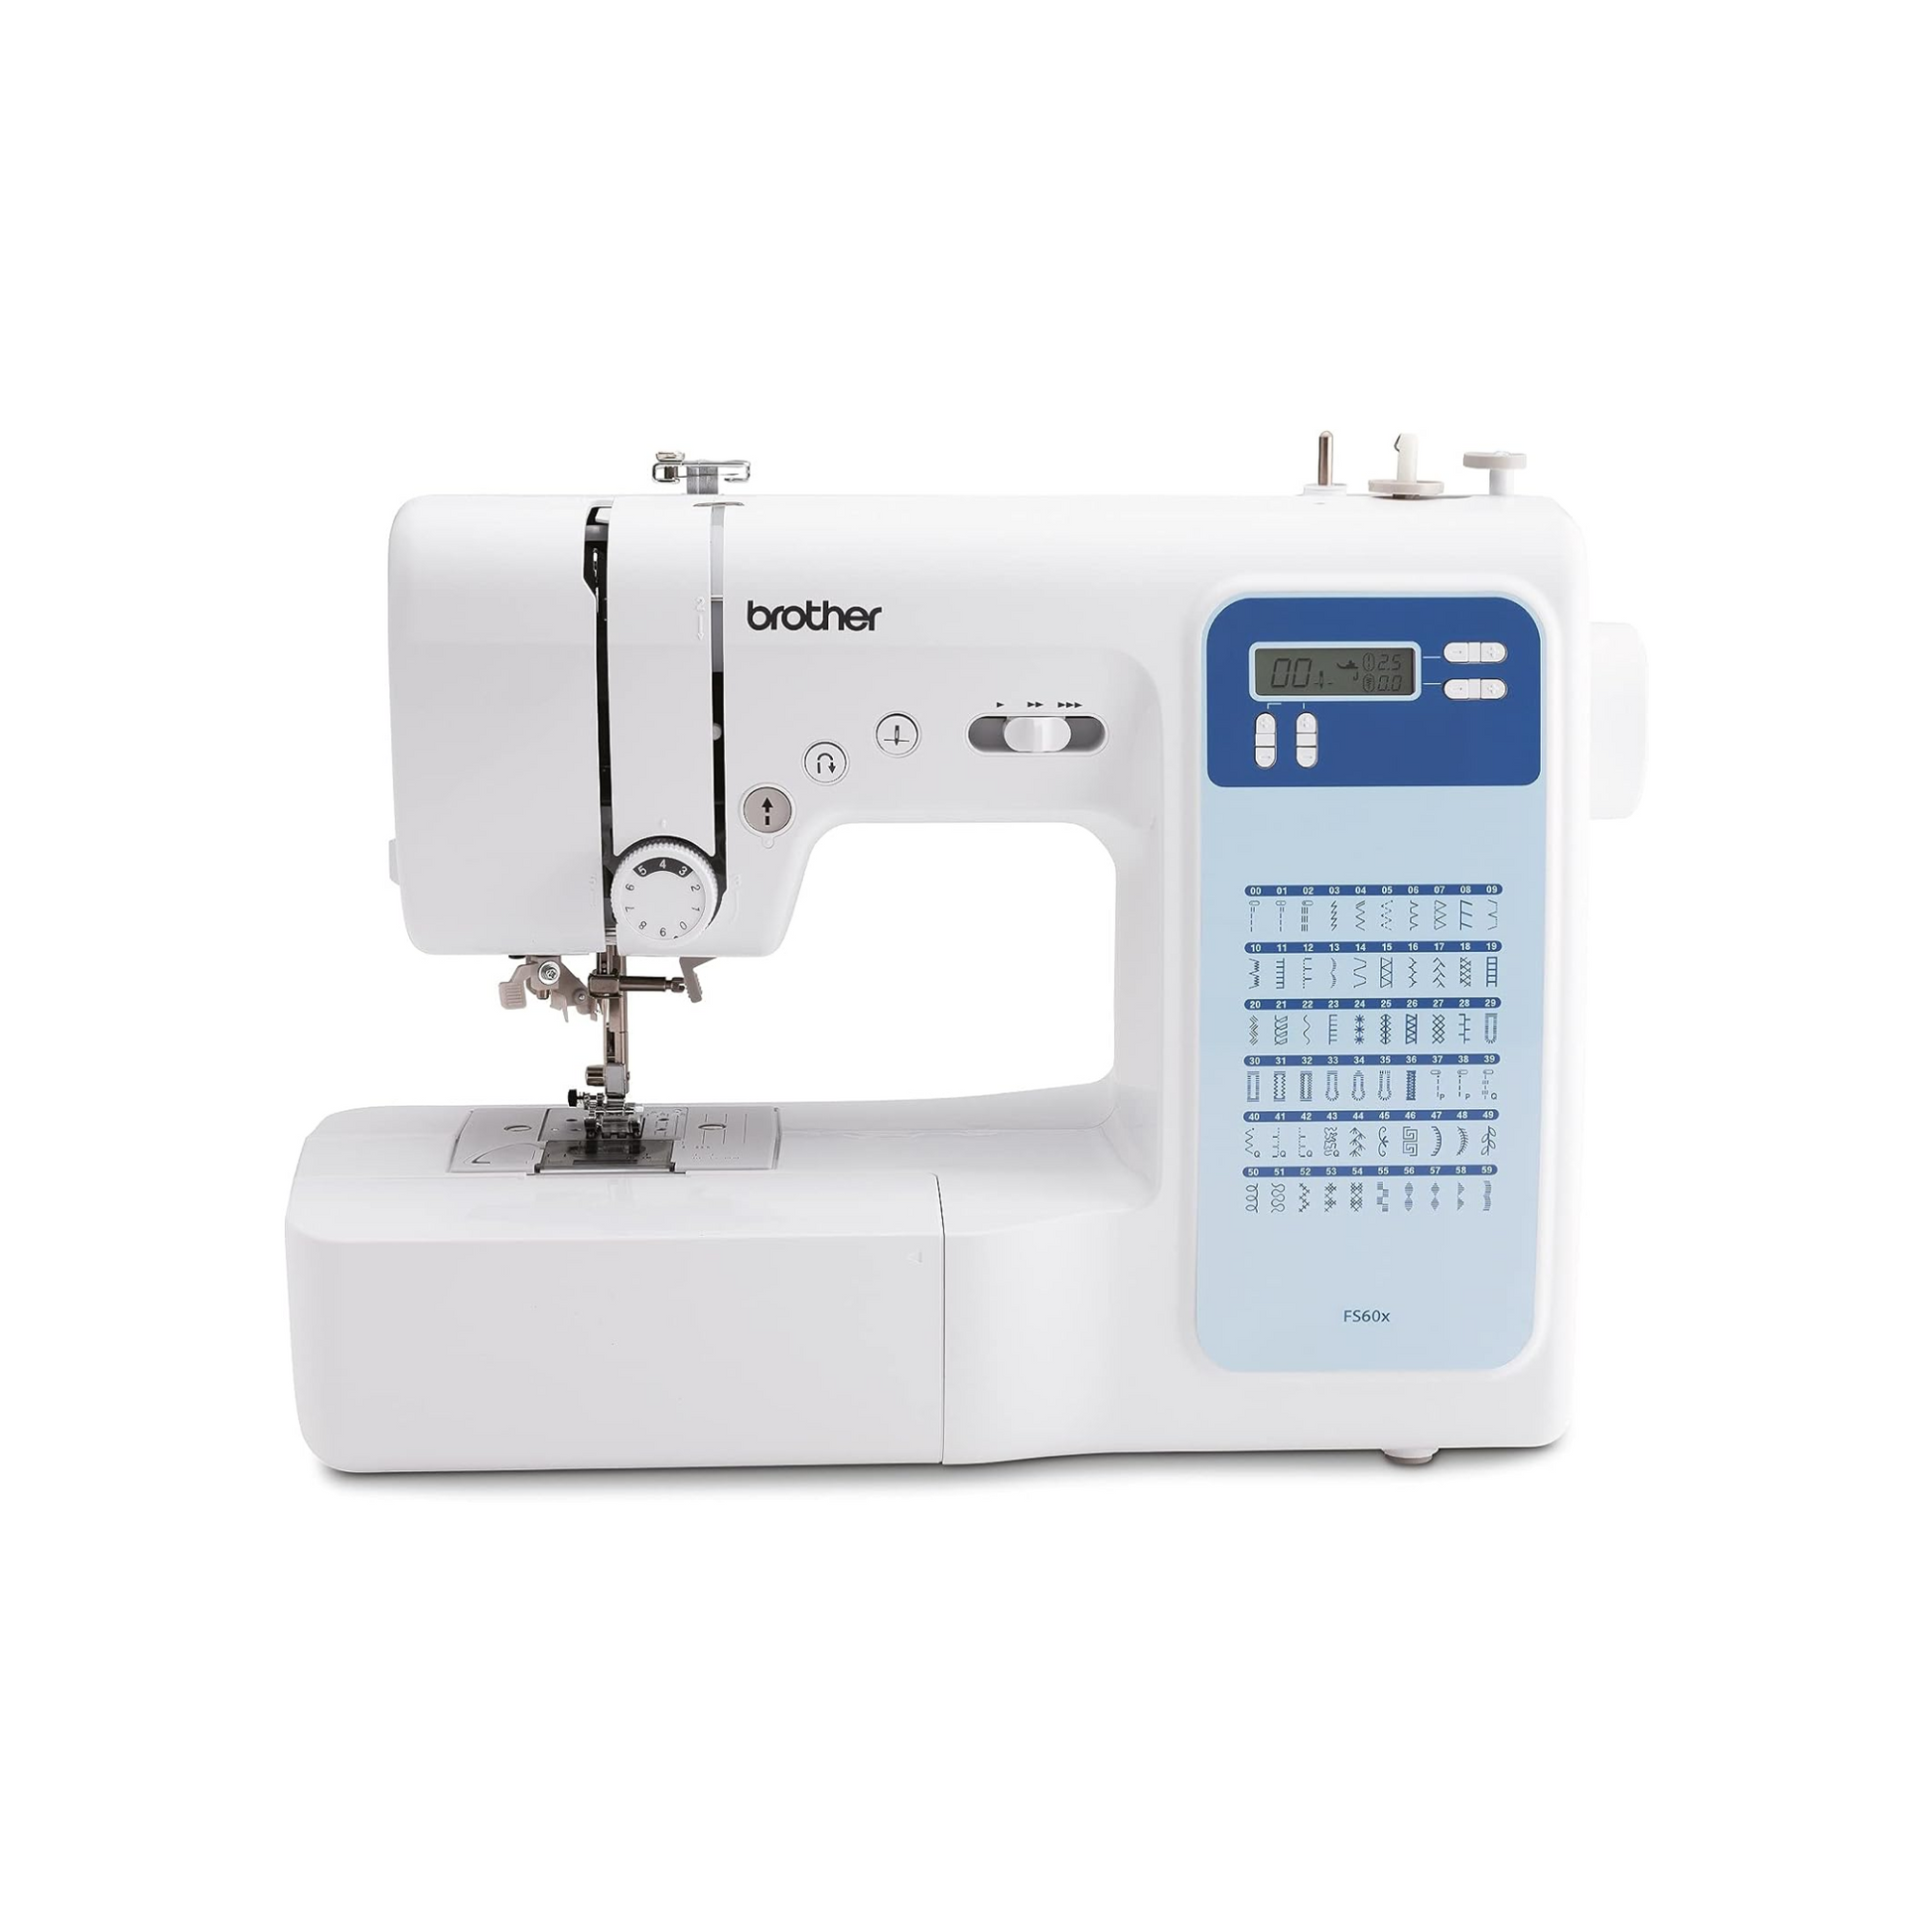 Brother FS60X - Sewing machine - White - Front view